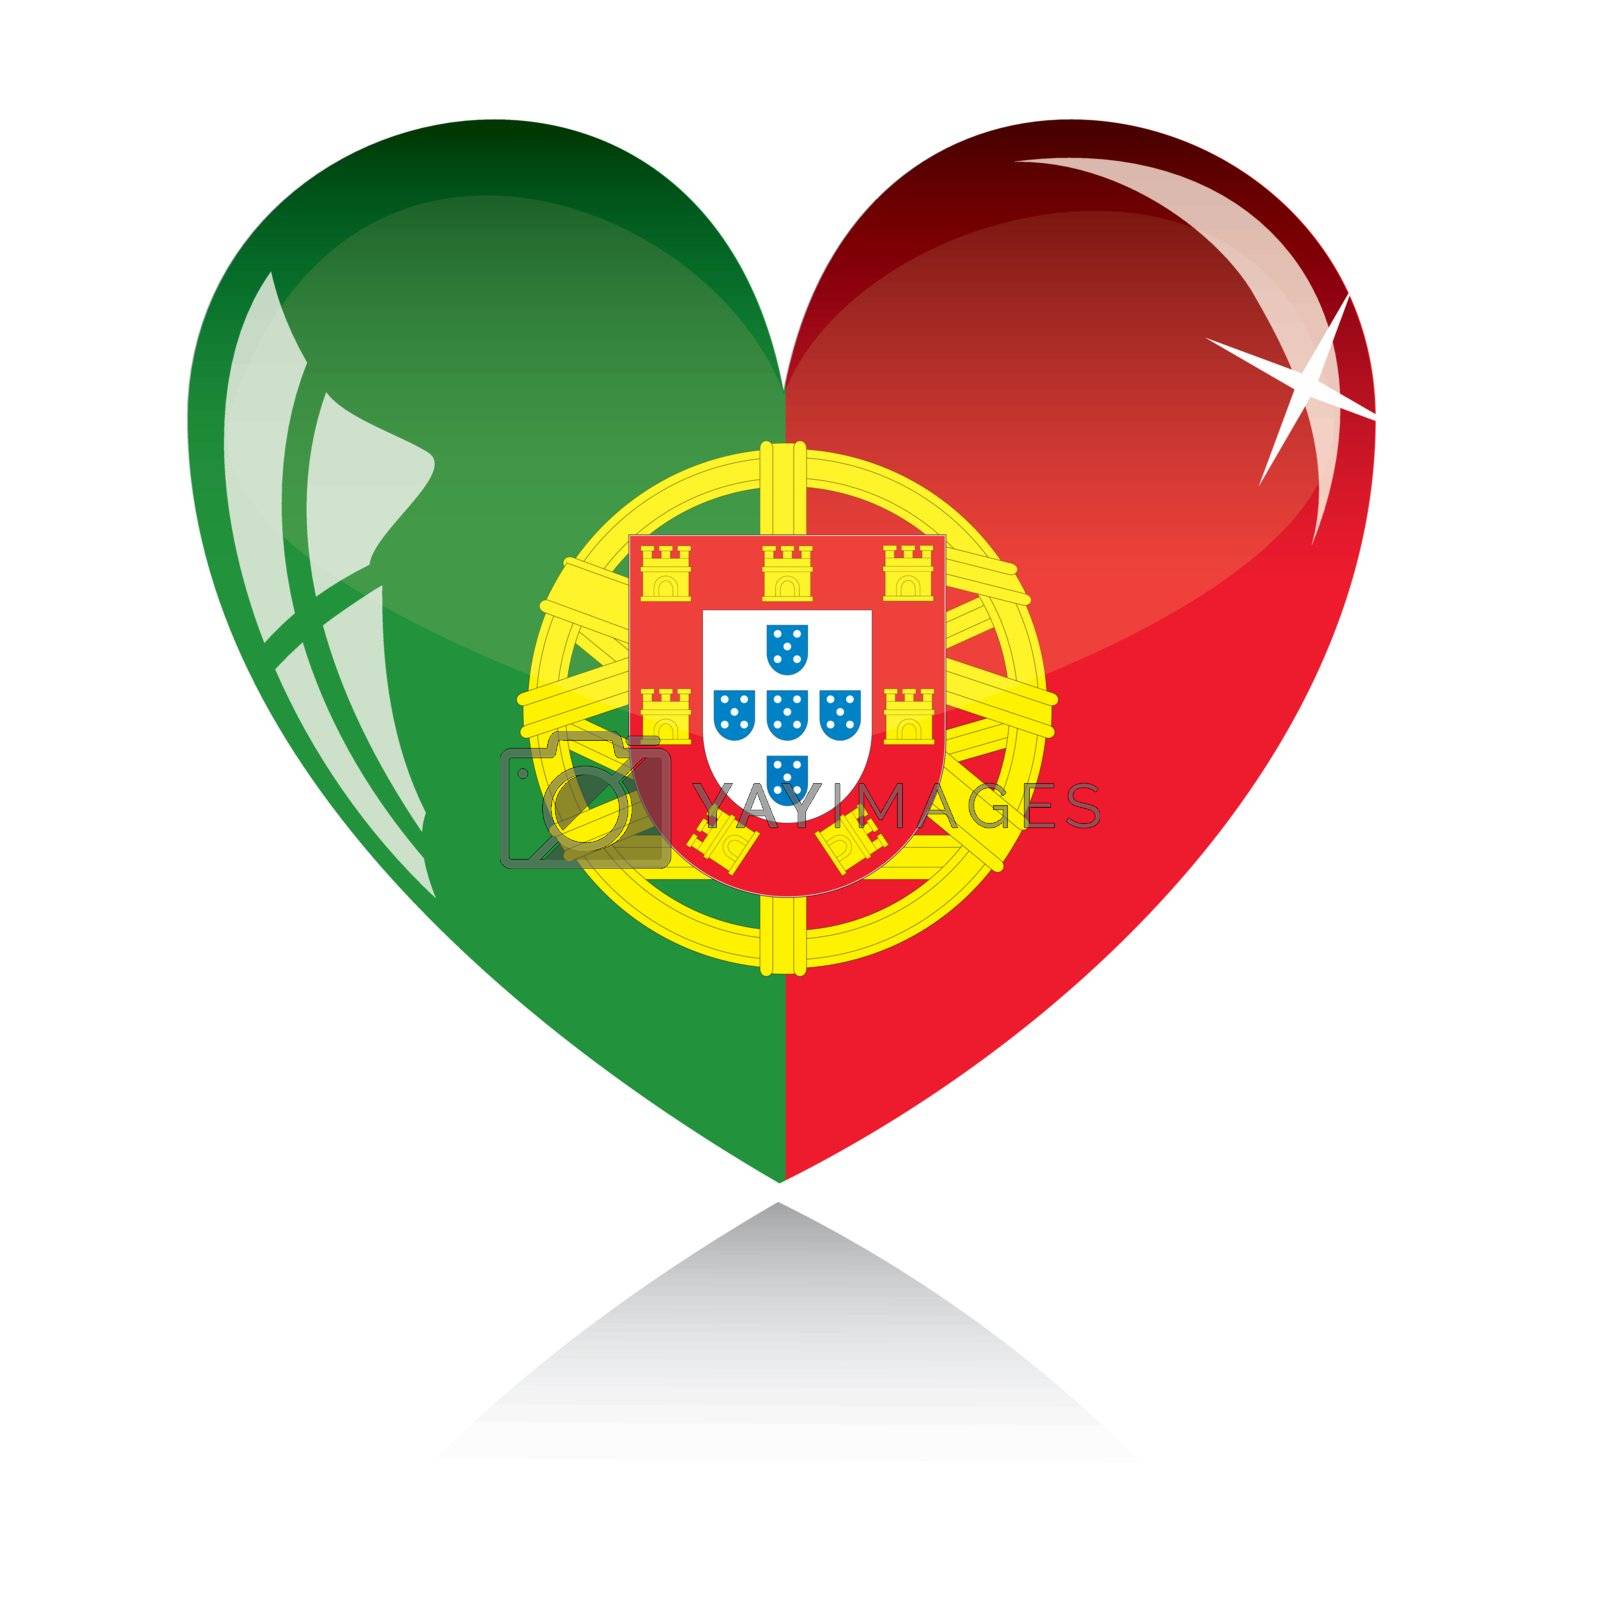 Royalty free image of Vector heart with Portugal flag texture isolated on a white. by SolanD